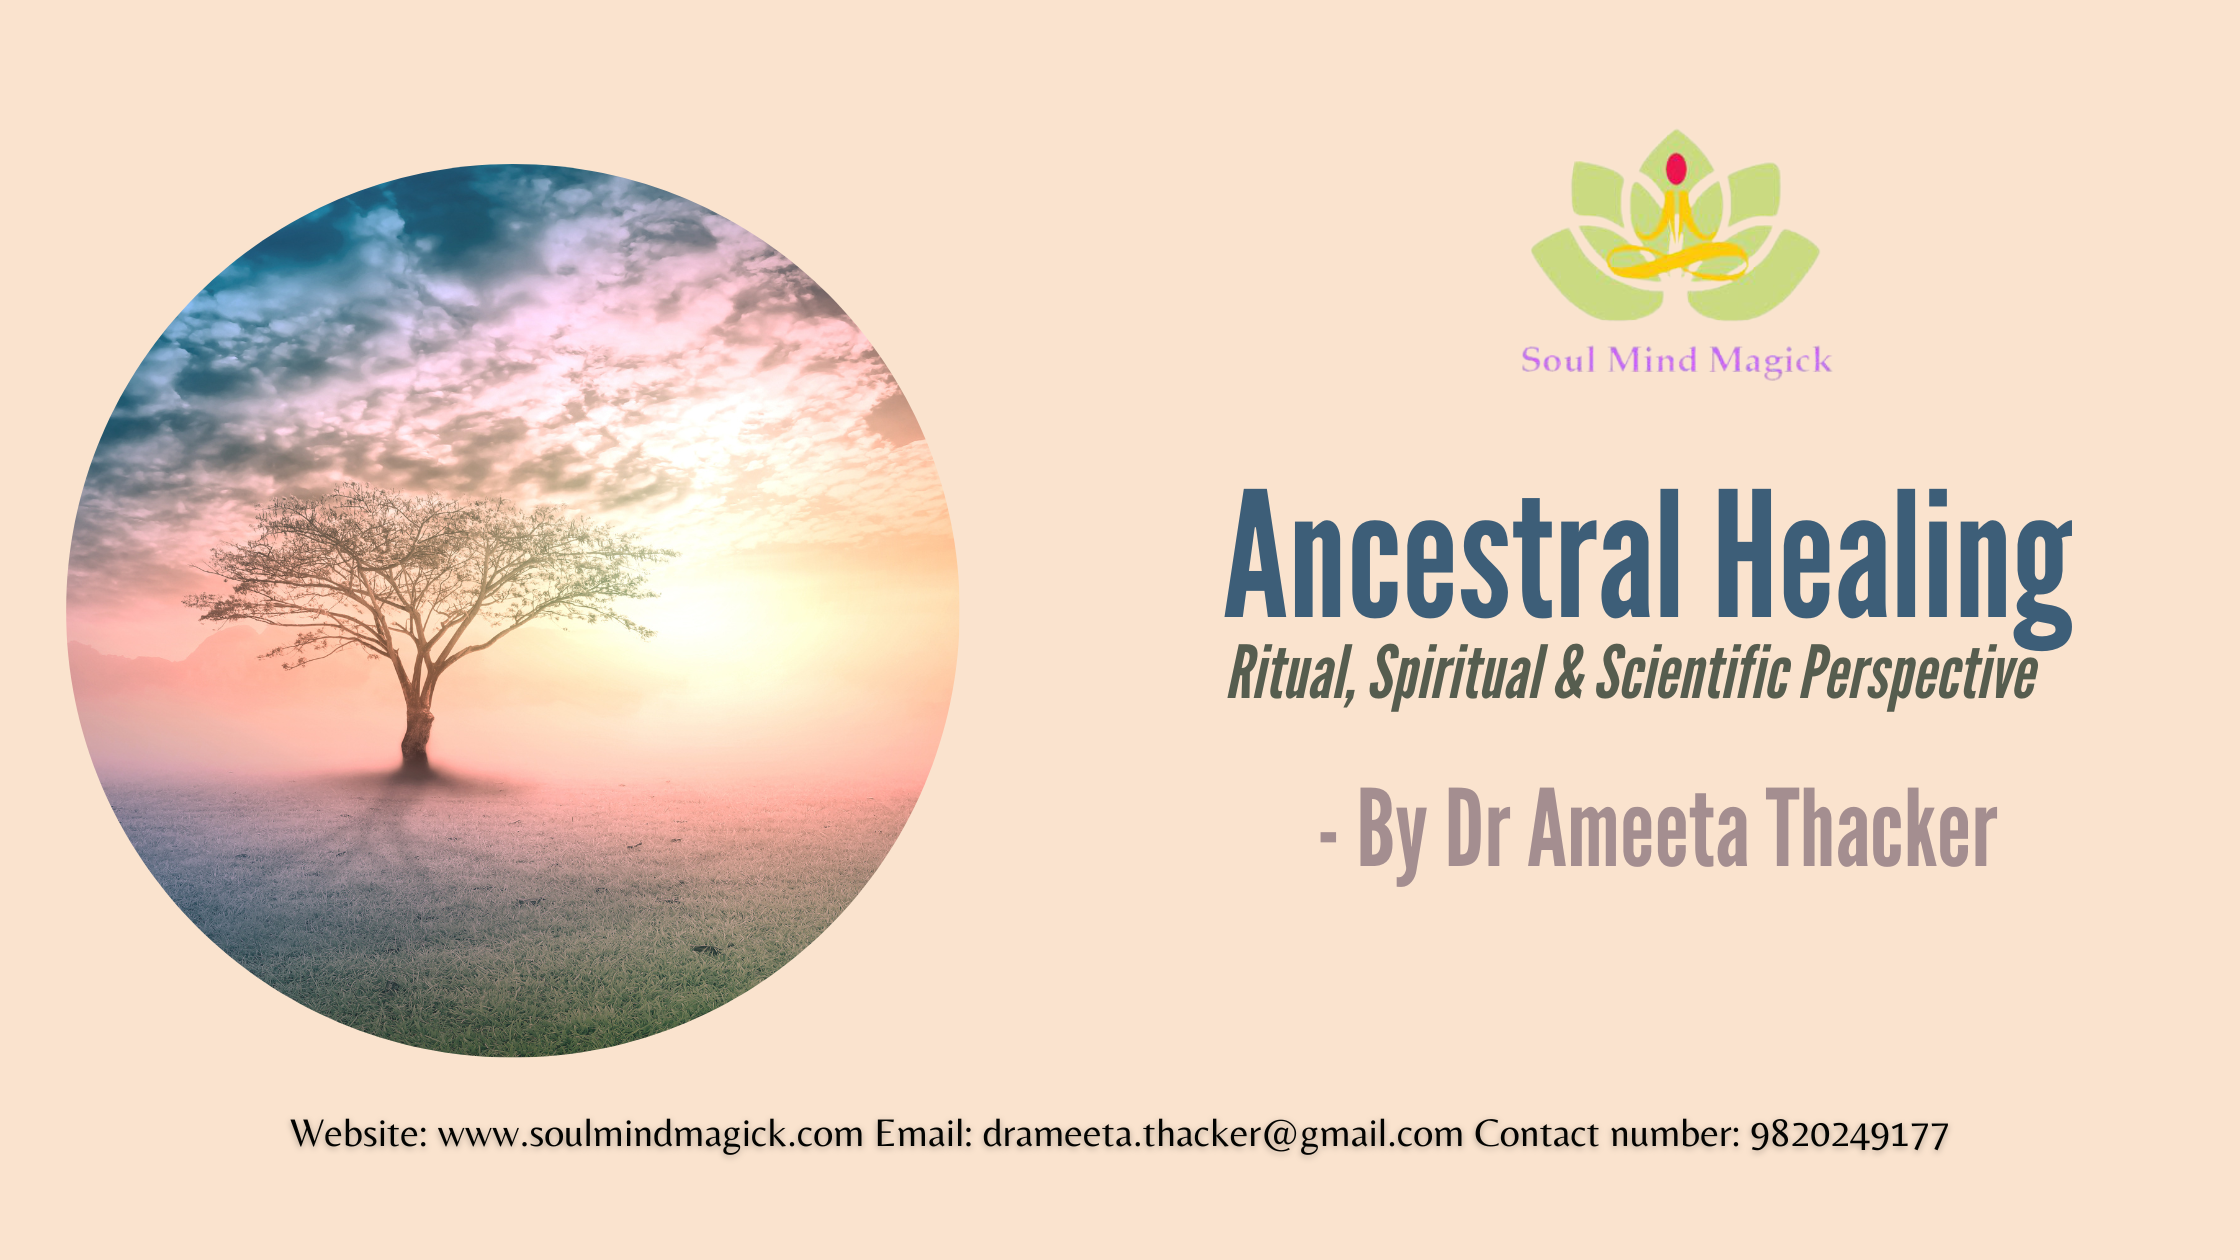 How is DNA linked to Ancestral Healing?